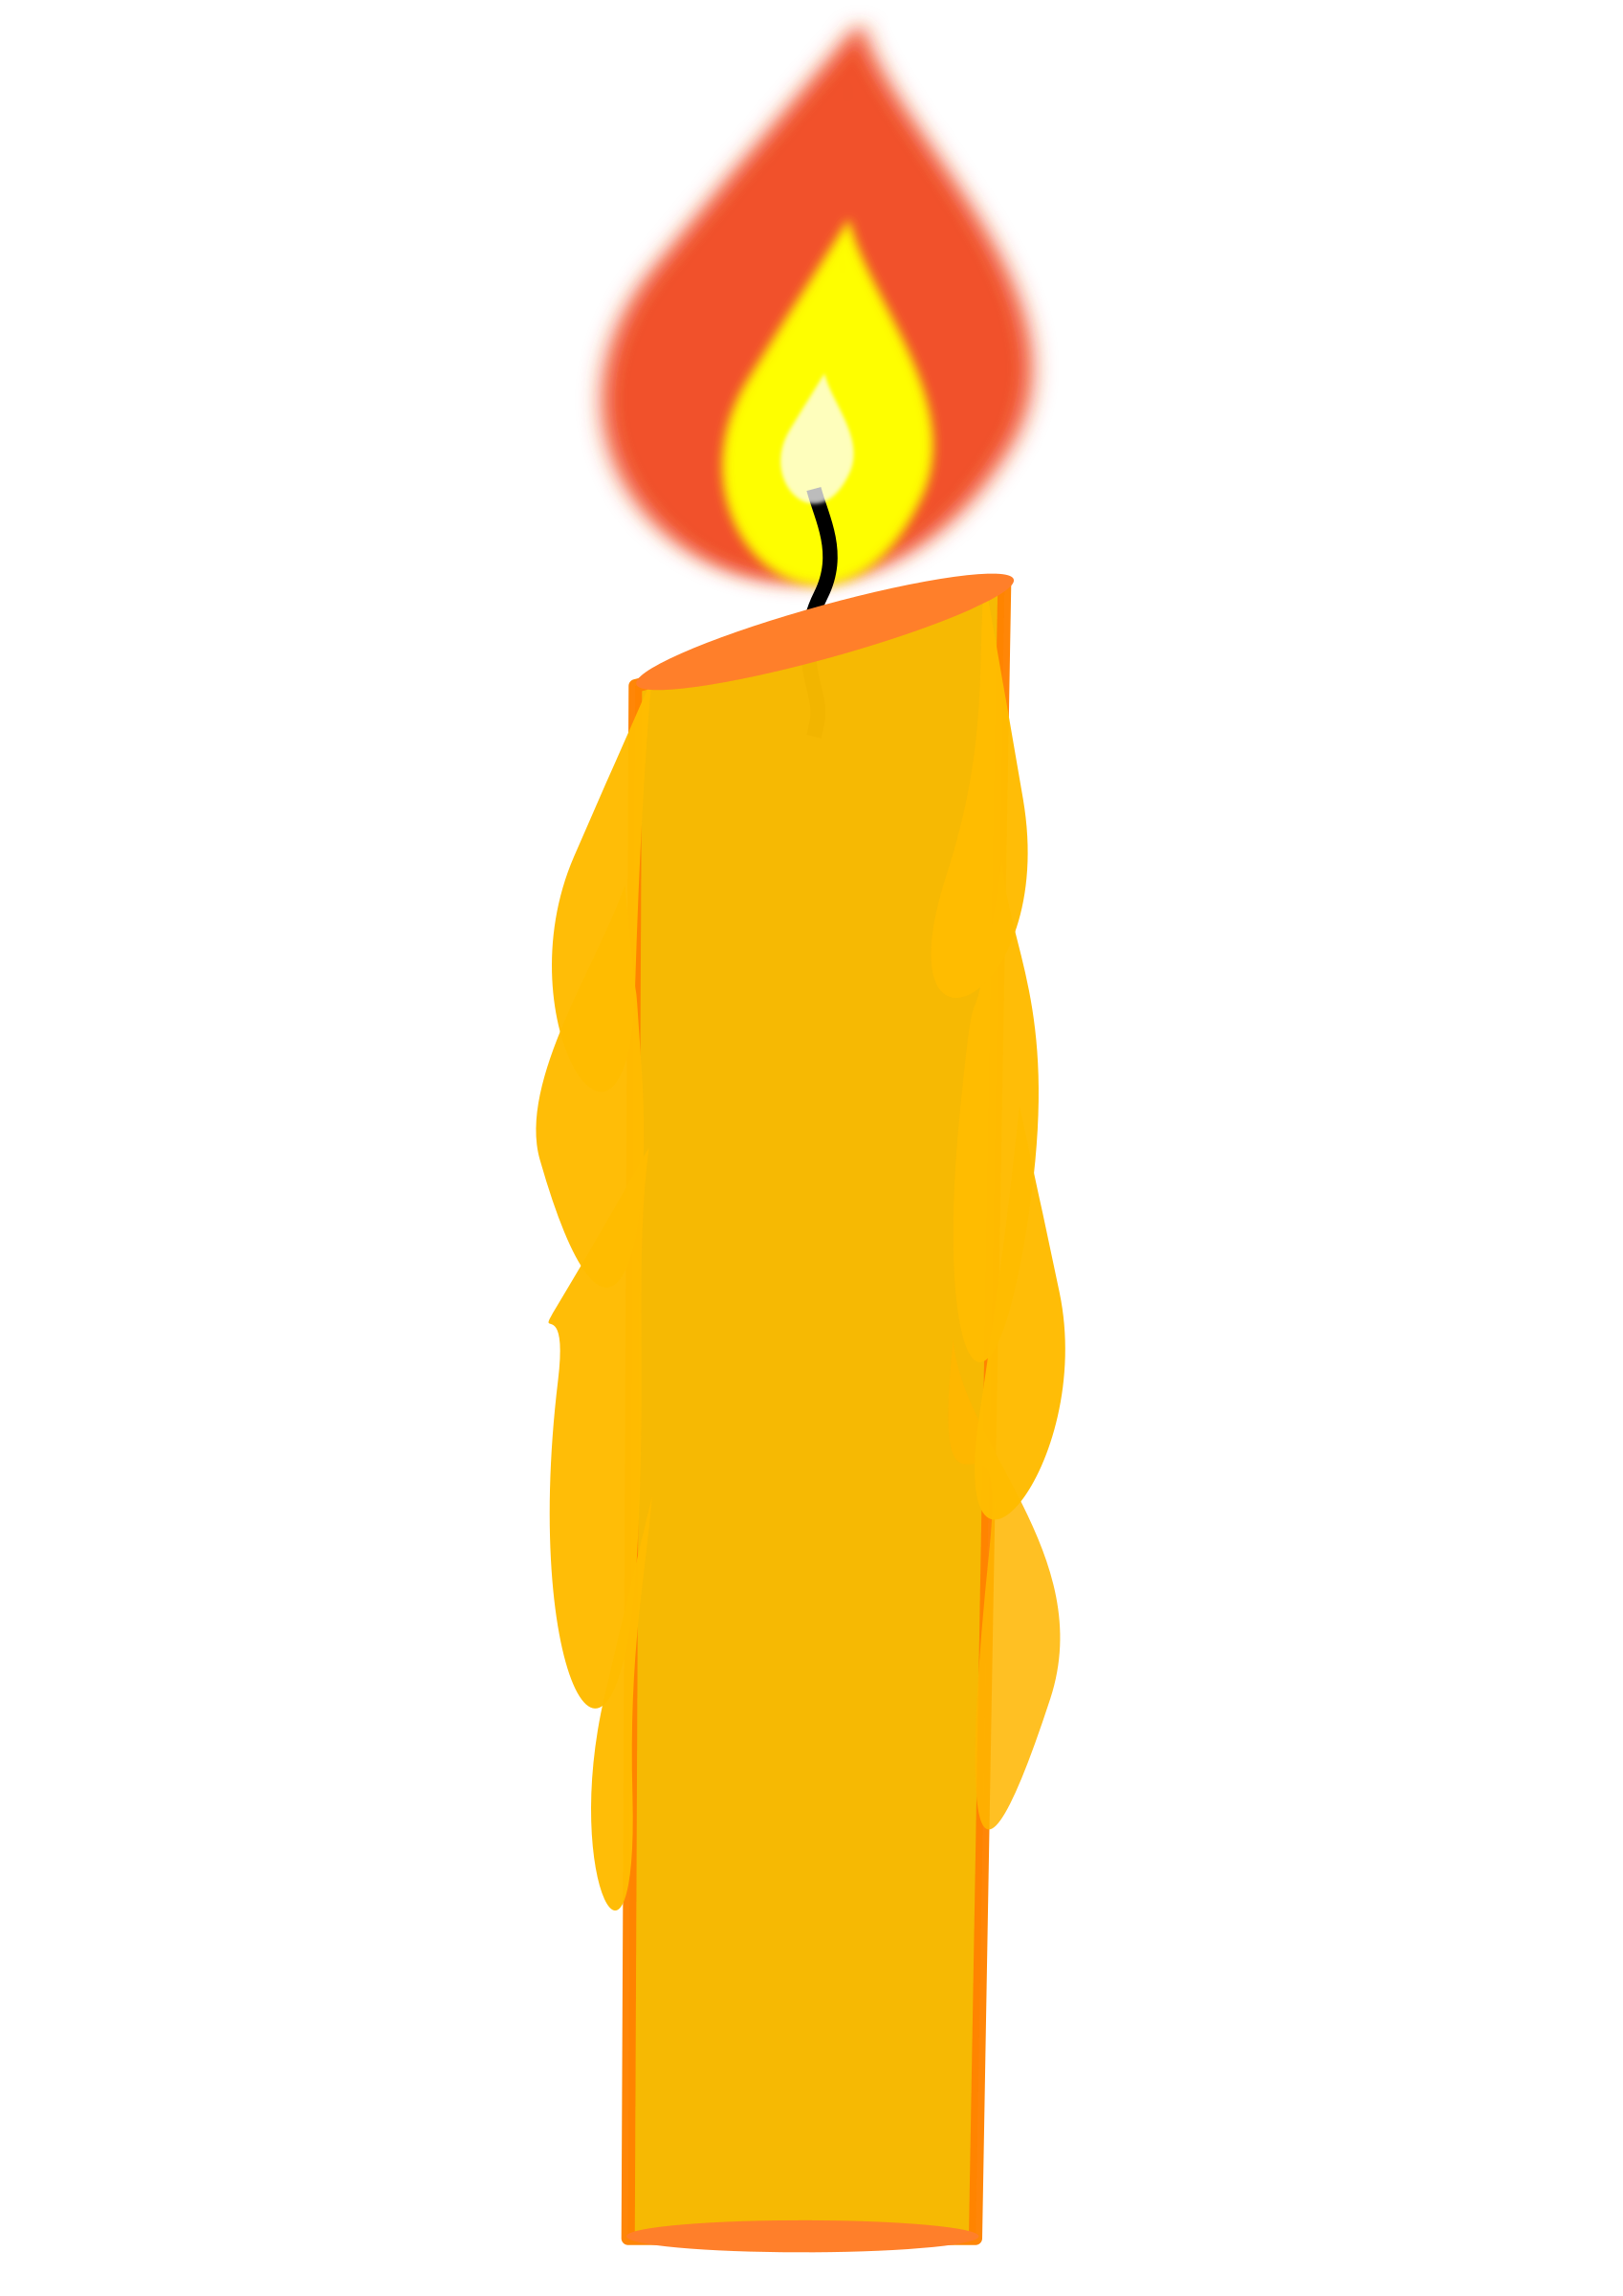 Candles clipart pdf. Candle big image png